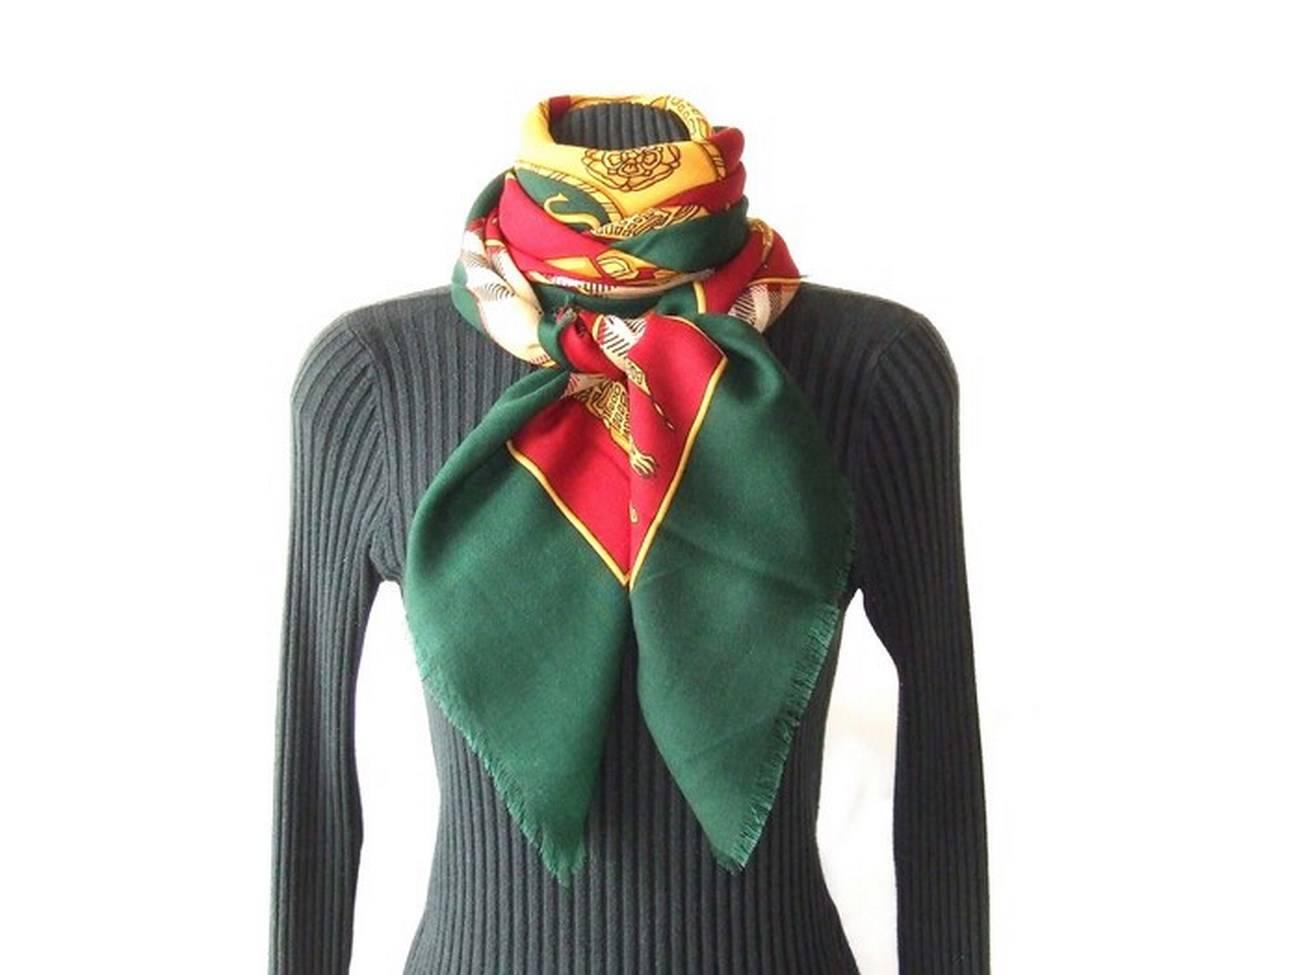 Authentic Burberry Scarf Shawl Green Check Pattern Wool 54 Inches 5